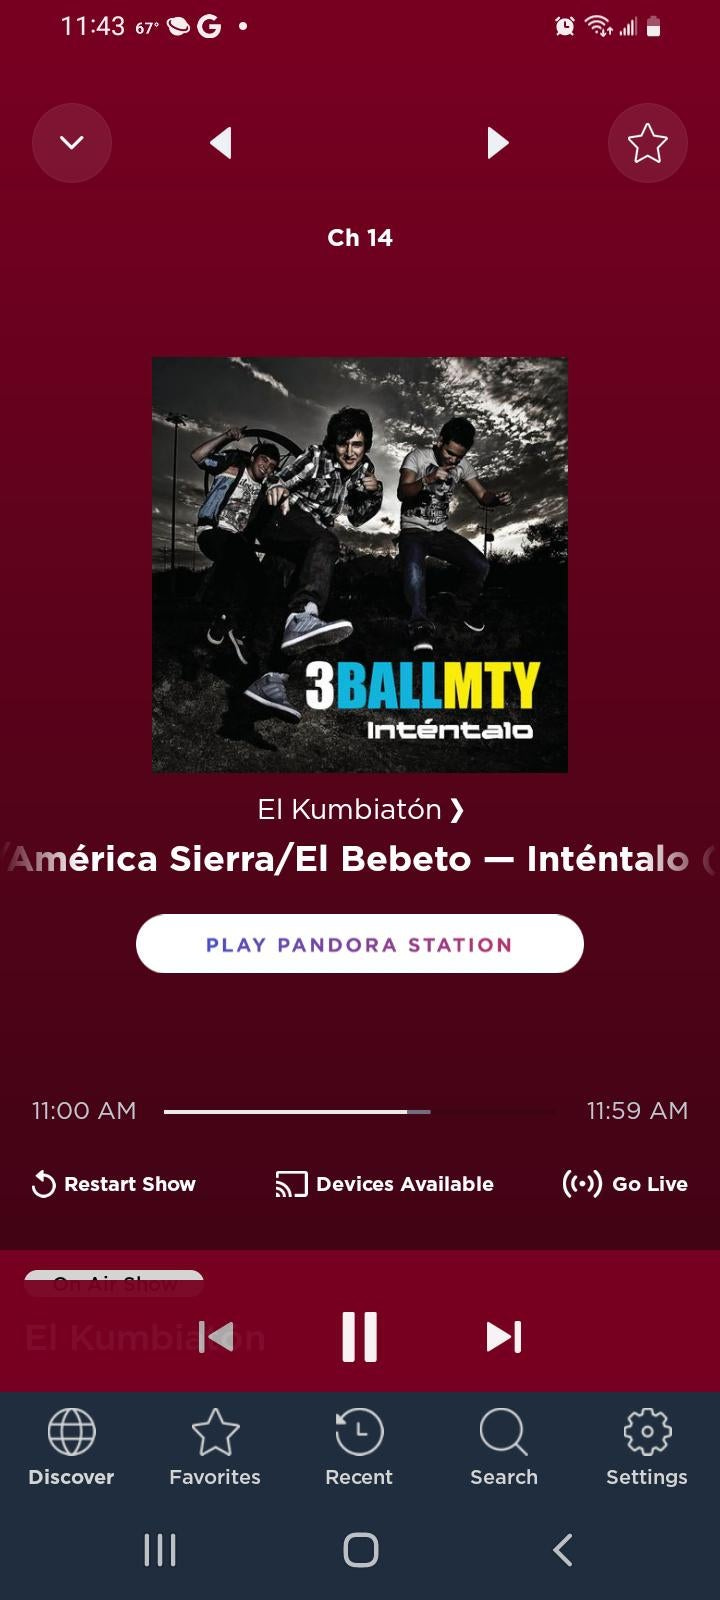 r/siriusxm - Águila is now on Ch 14 for Hispanic Heritage Month replacing Happy Radio